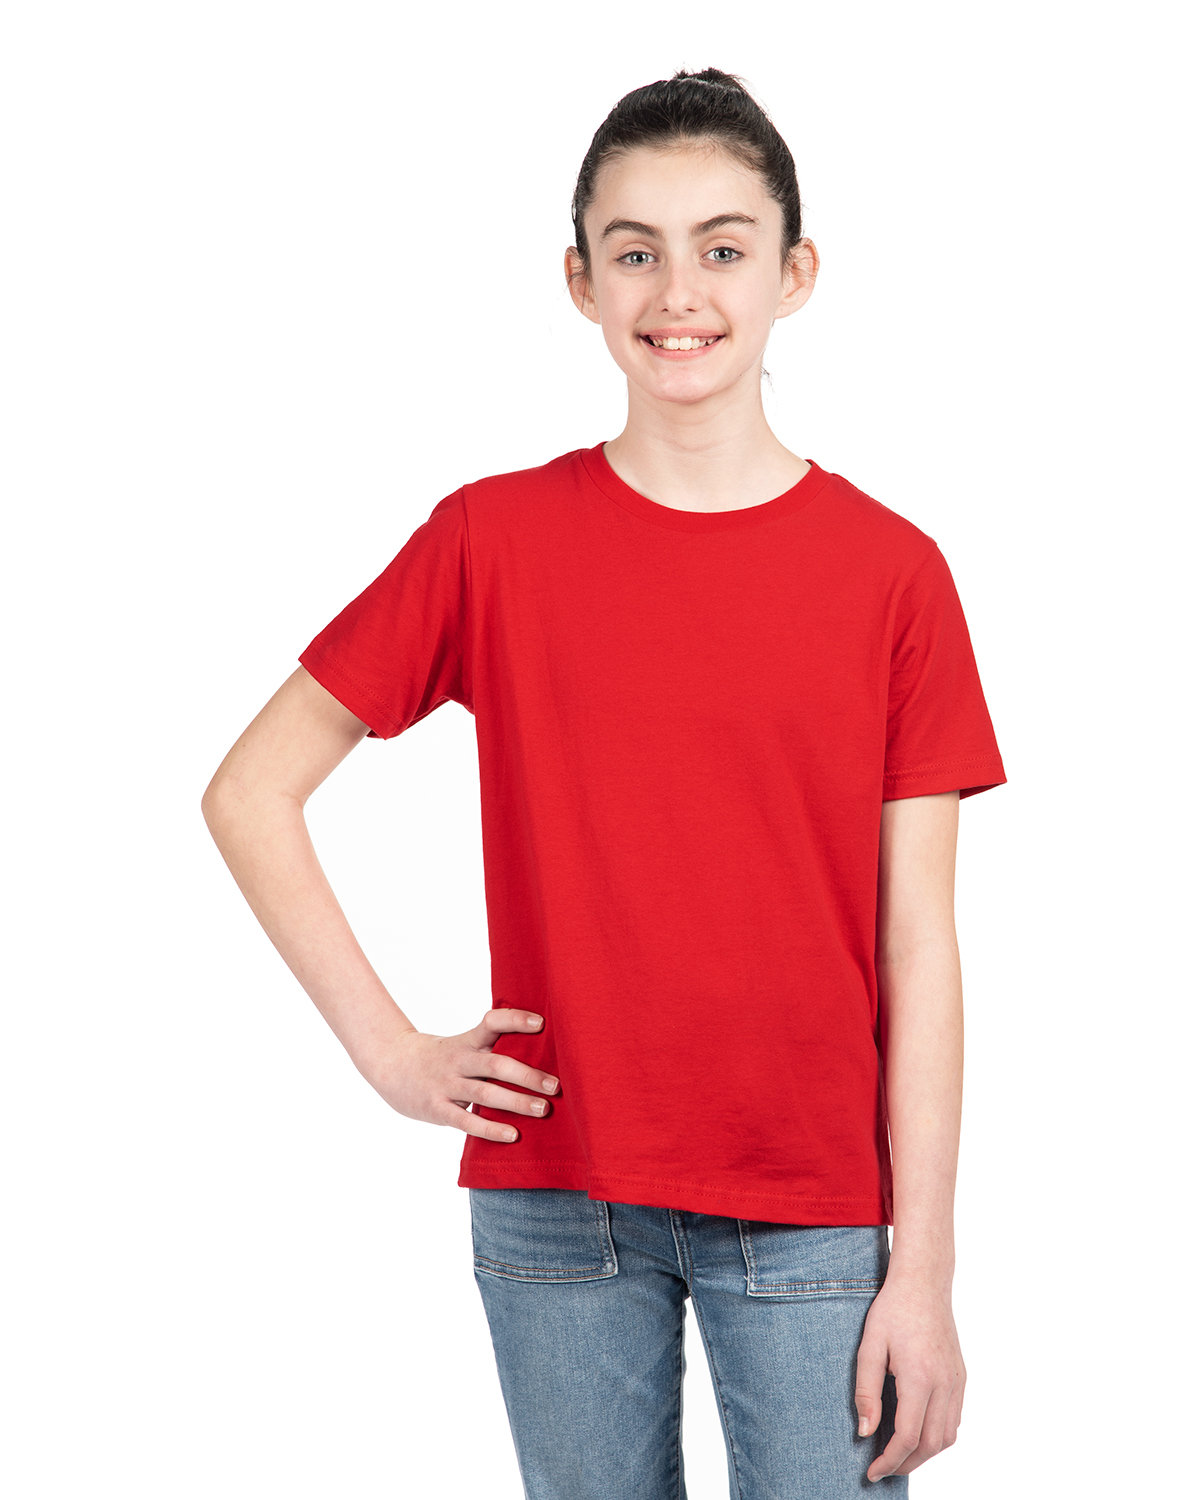 Next Level Youth Boys’ Cotton Crew RED 